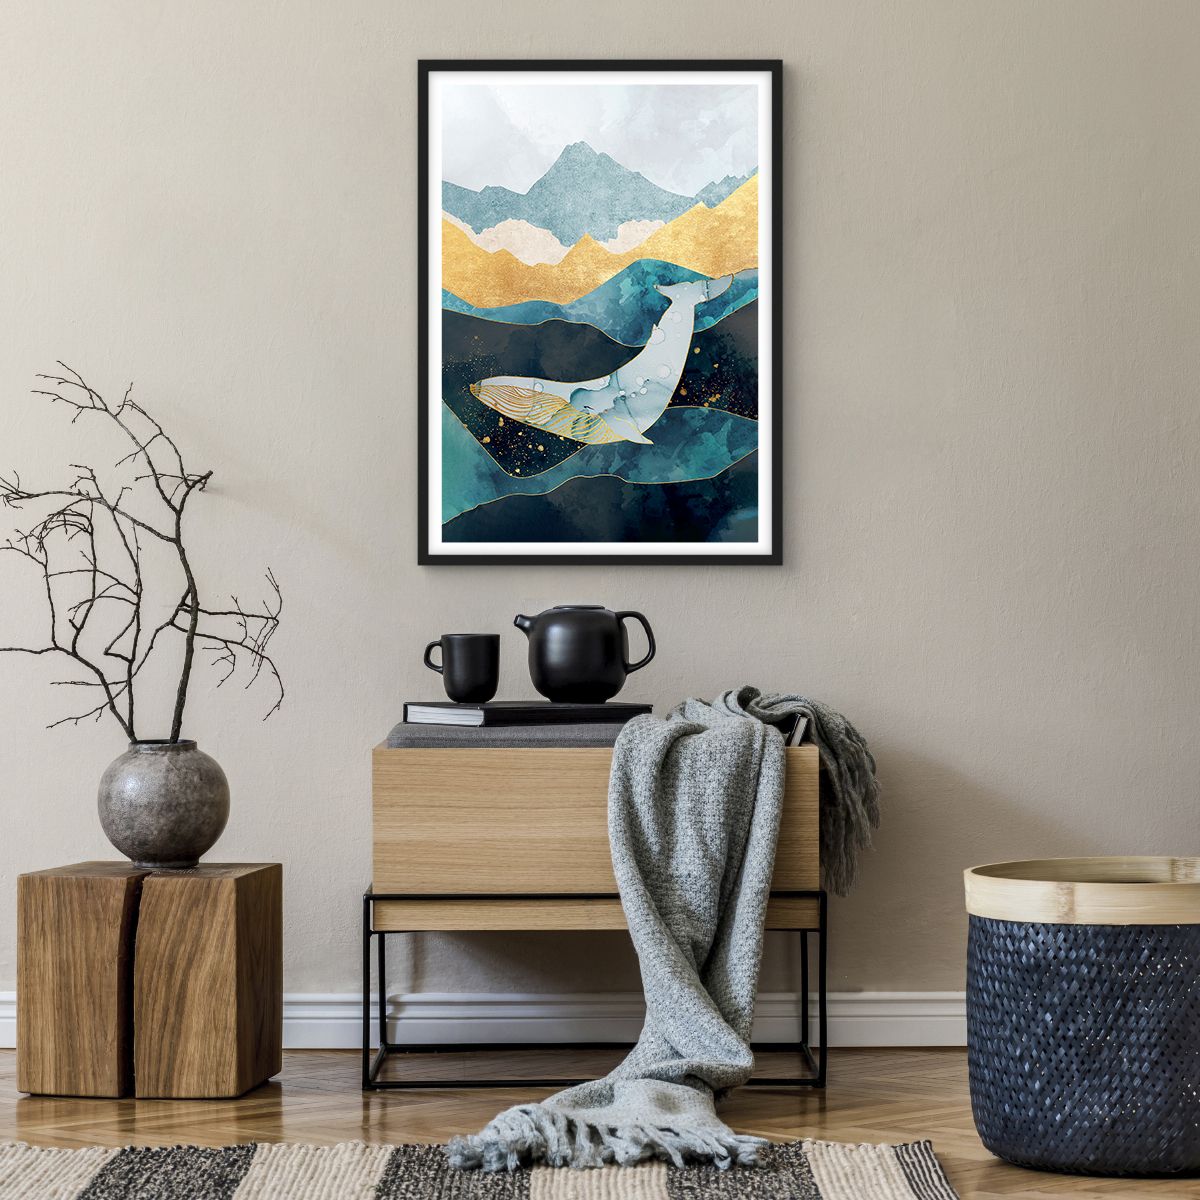 Poster in Black Frame Abstraction, Poster in Black Frame Whale, Poster in Black Frame Art, Poster in Black Frame Modern Art, Poster in Black Frame Artistic Art